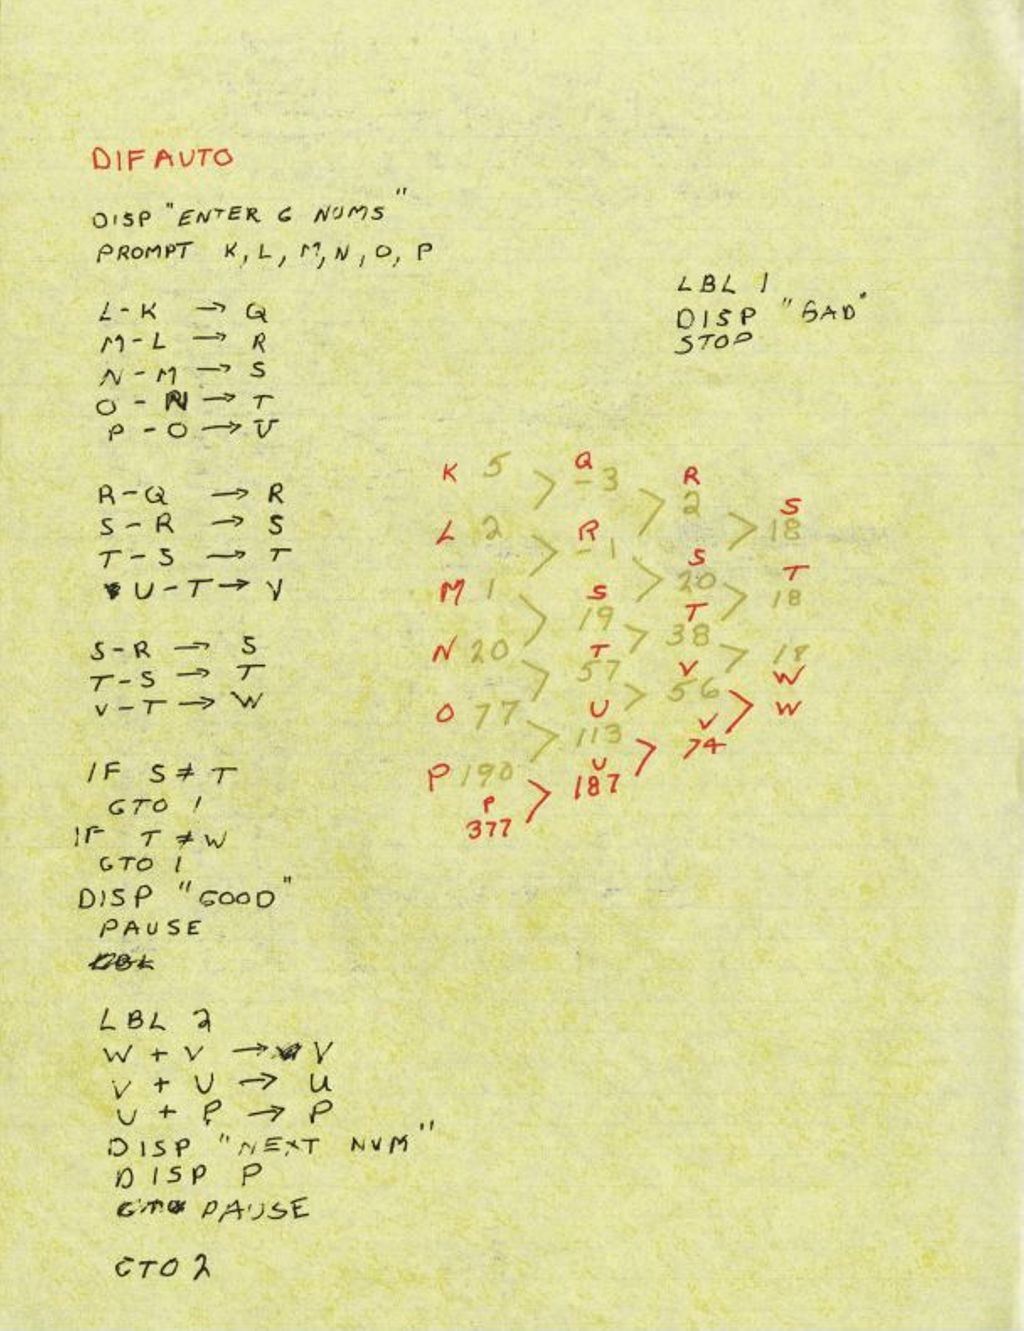 Miniature of Dif Auto (Graphing Cal. Program) Handwritten by Page